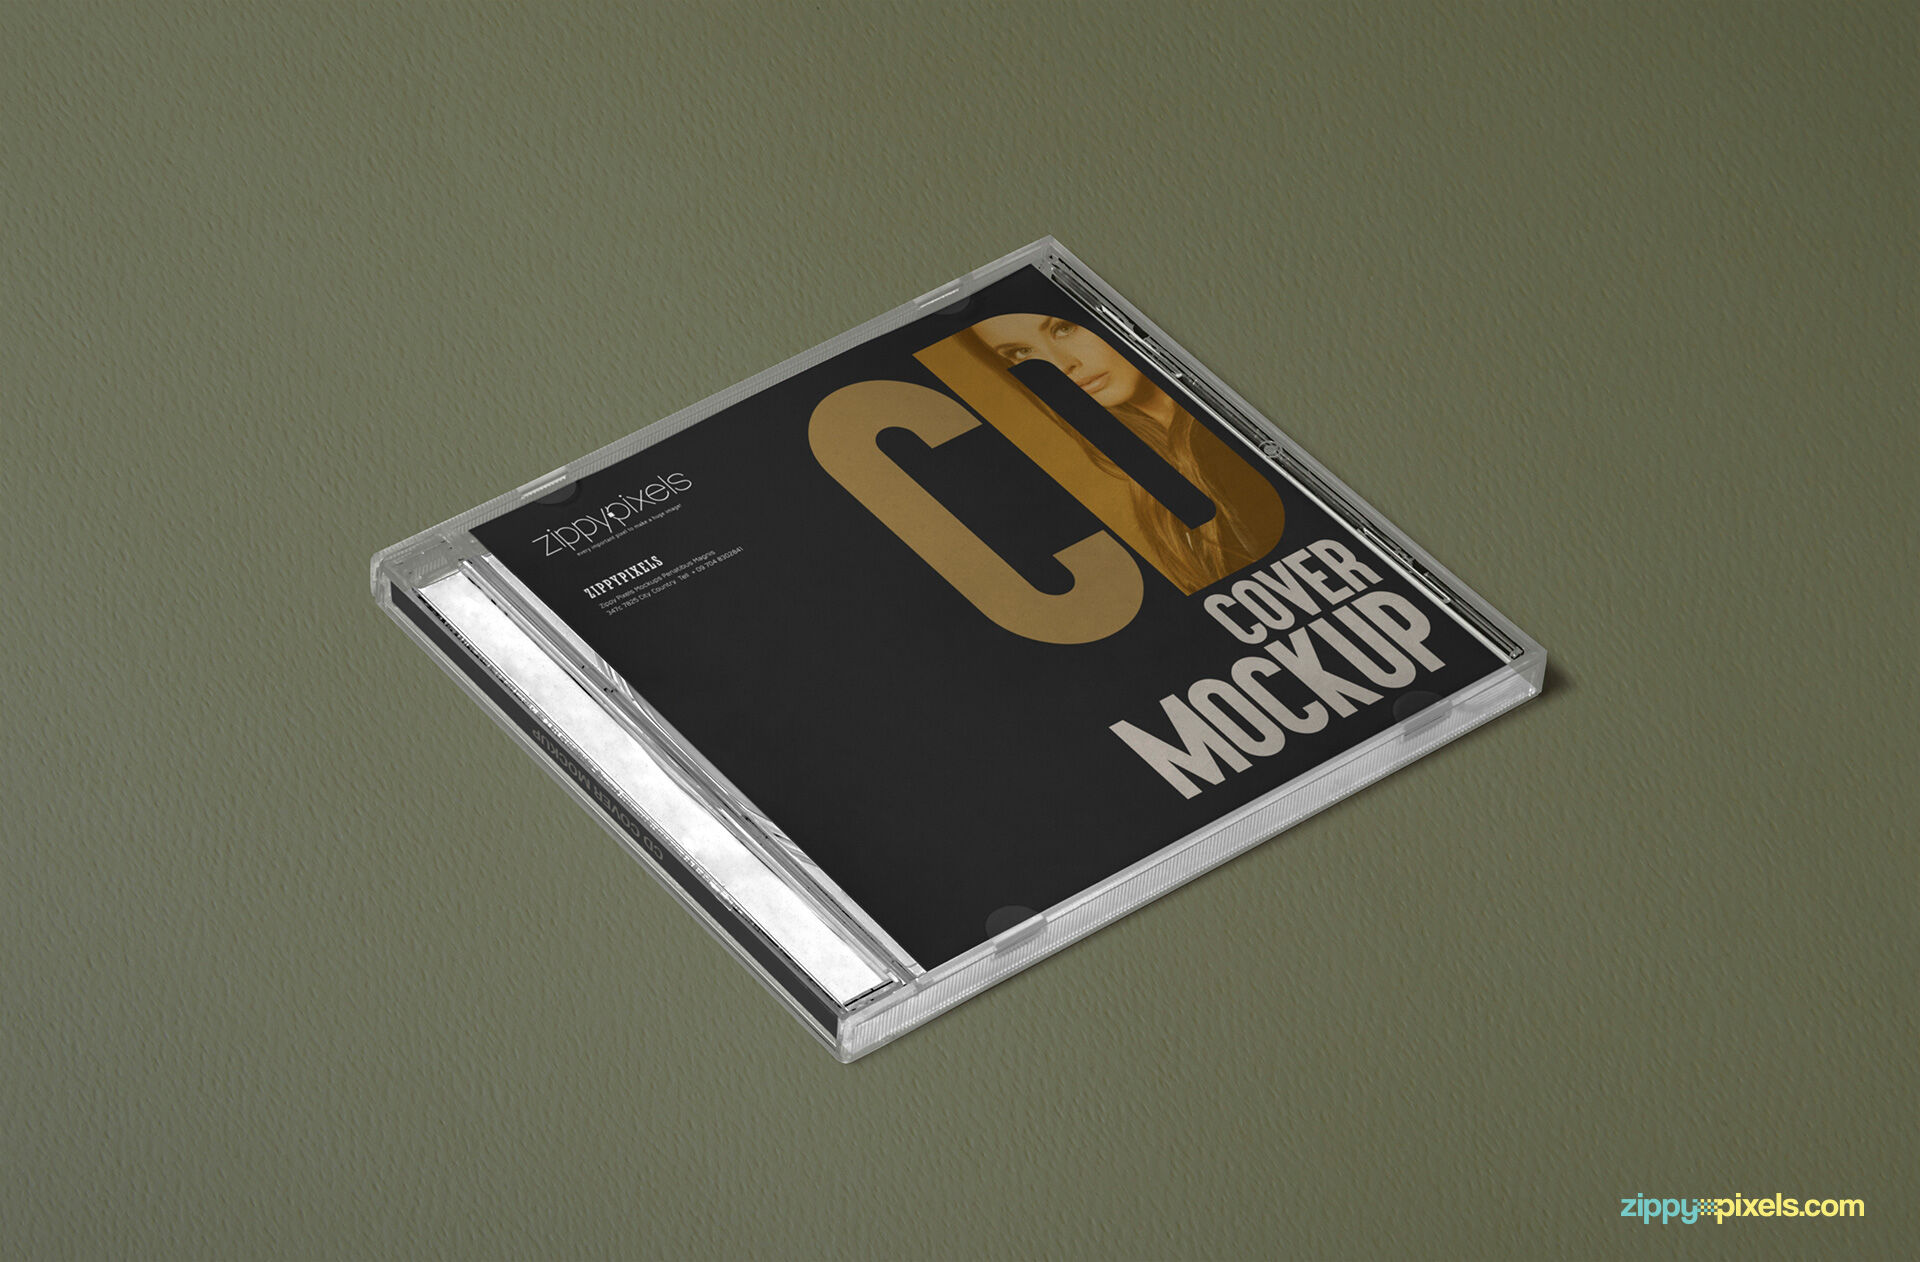 Mockup Featuring Closed and Opened CD Case Containing a CD FREE PSD